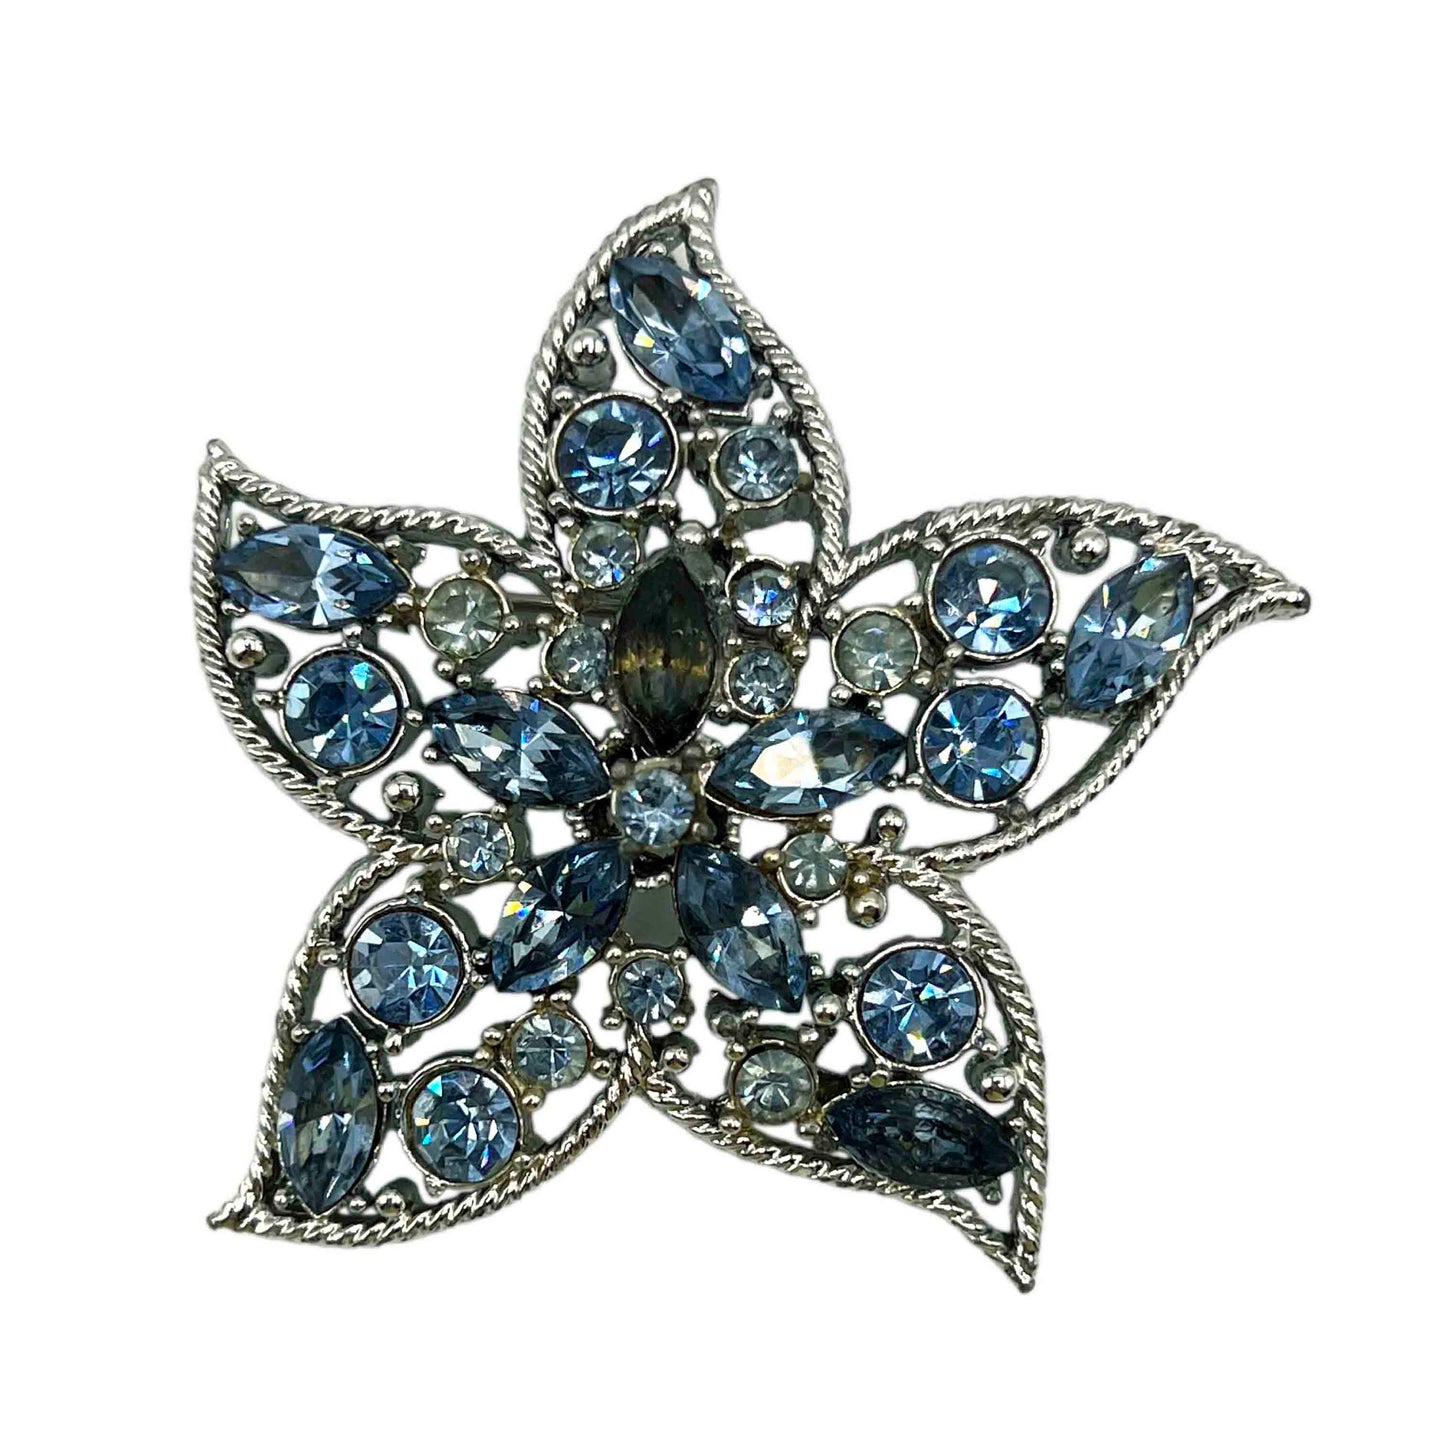 Vintage 1960s Sarah Coventry Star Fire Brooch